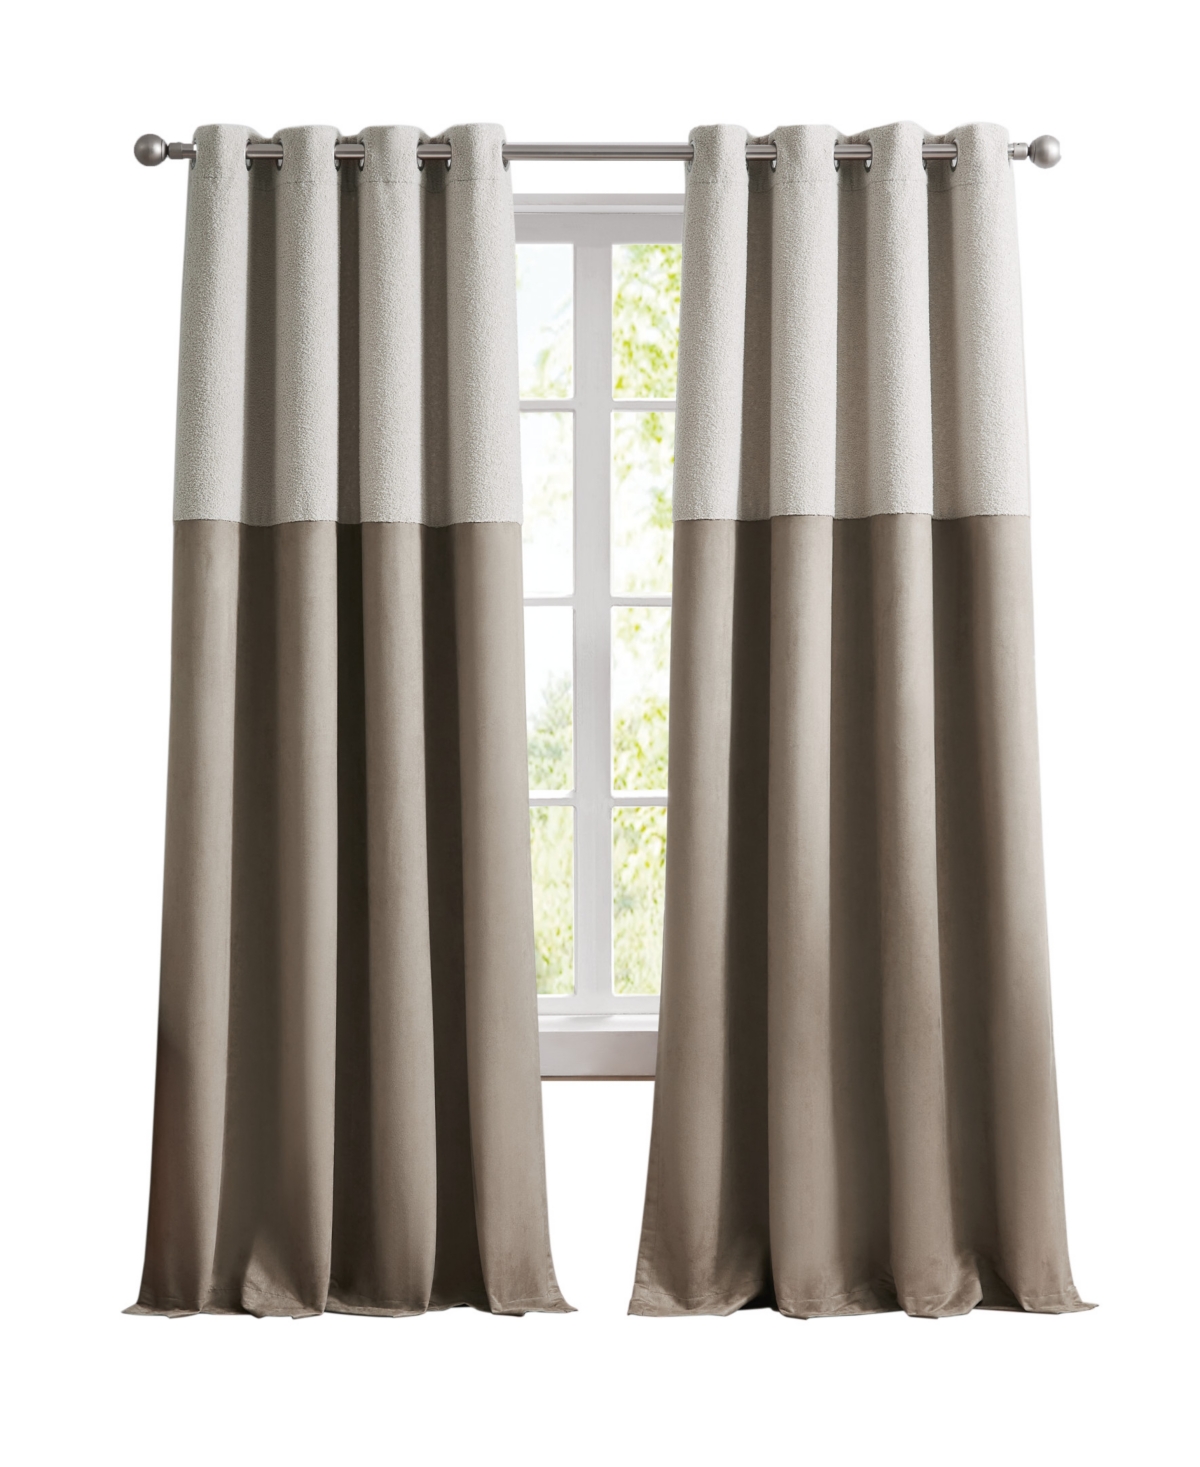 G.h. Bass & Co. Canyon Sherpa 95" Grommet Room Darkening Lined Set, 2 Panels In Oatmeal